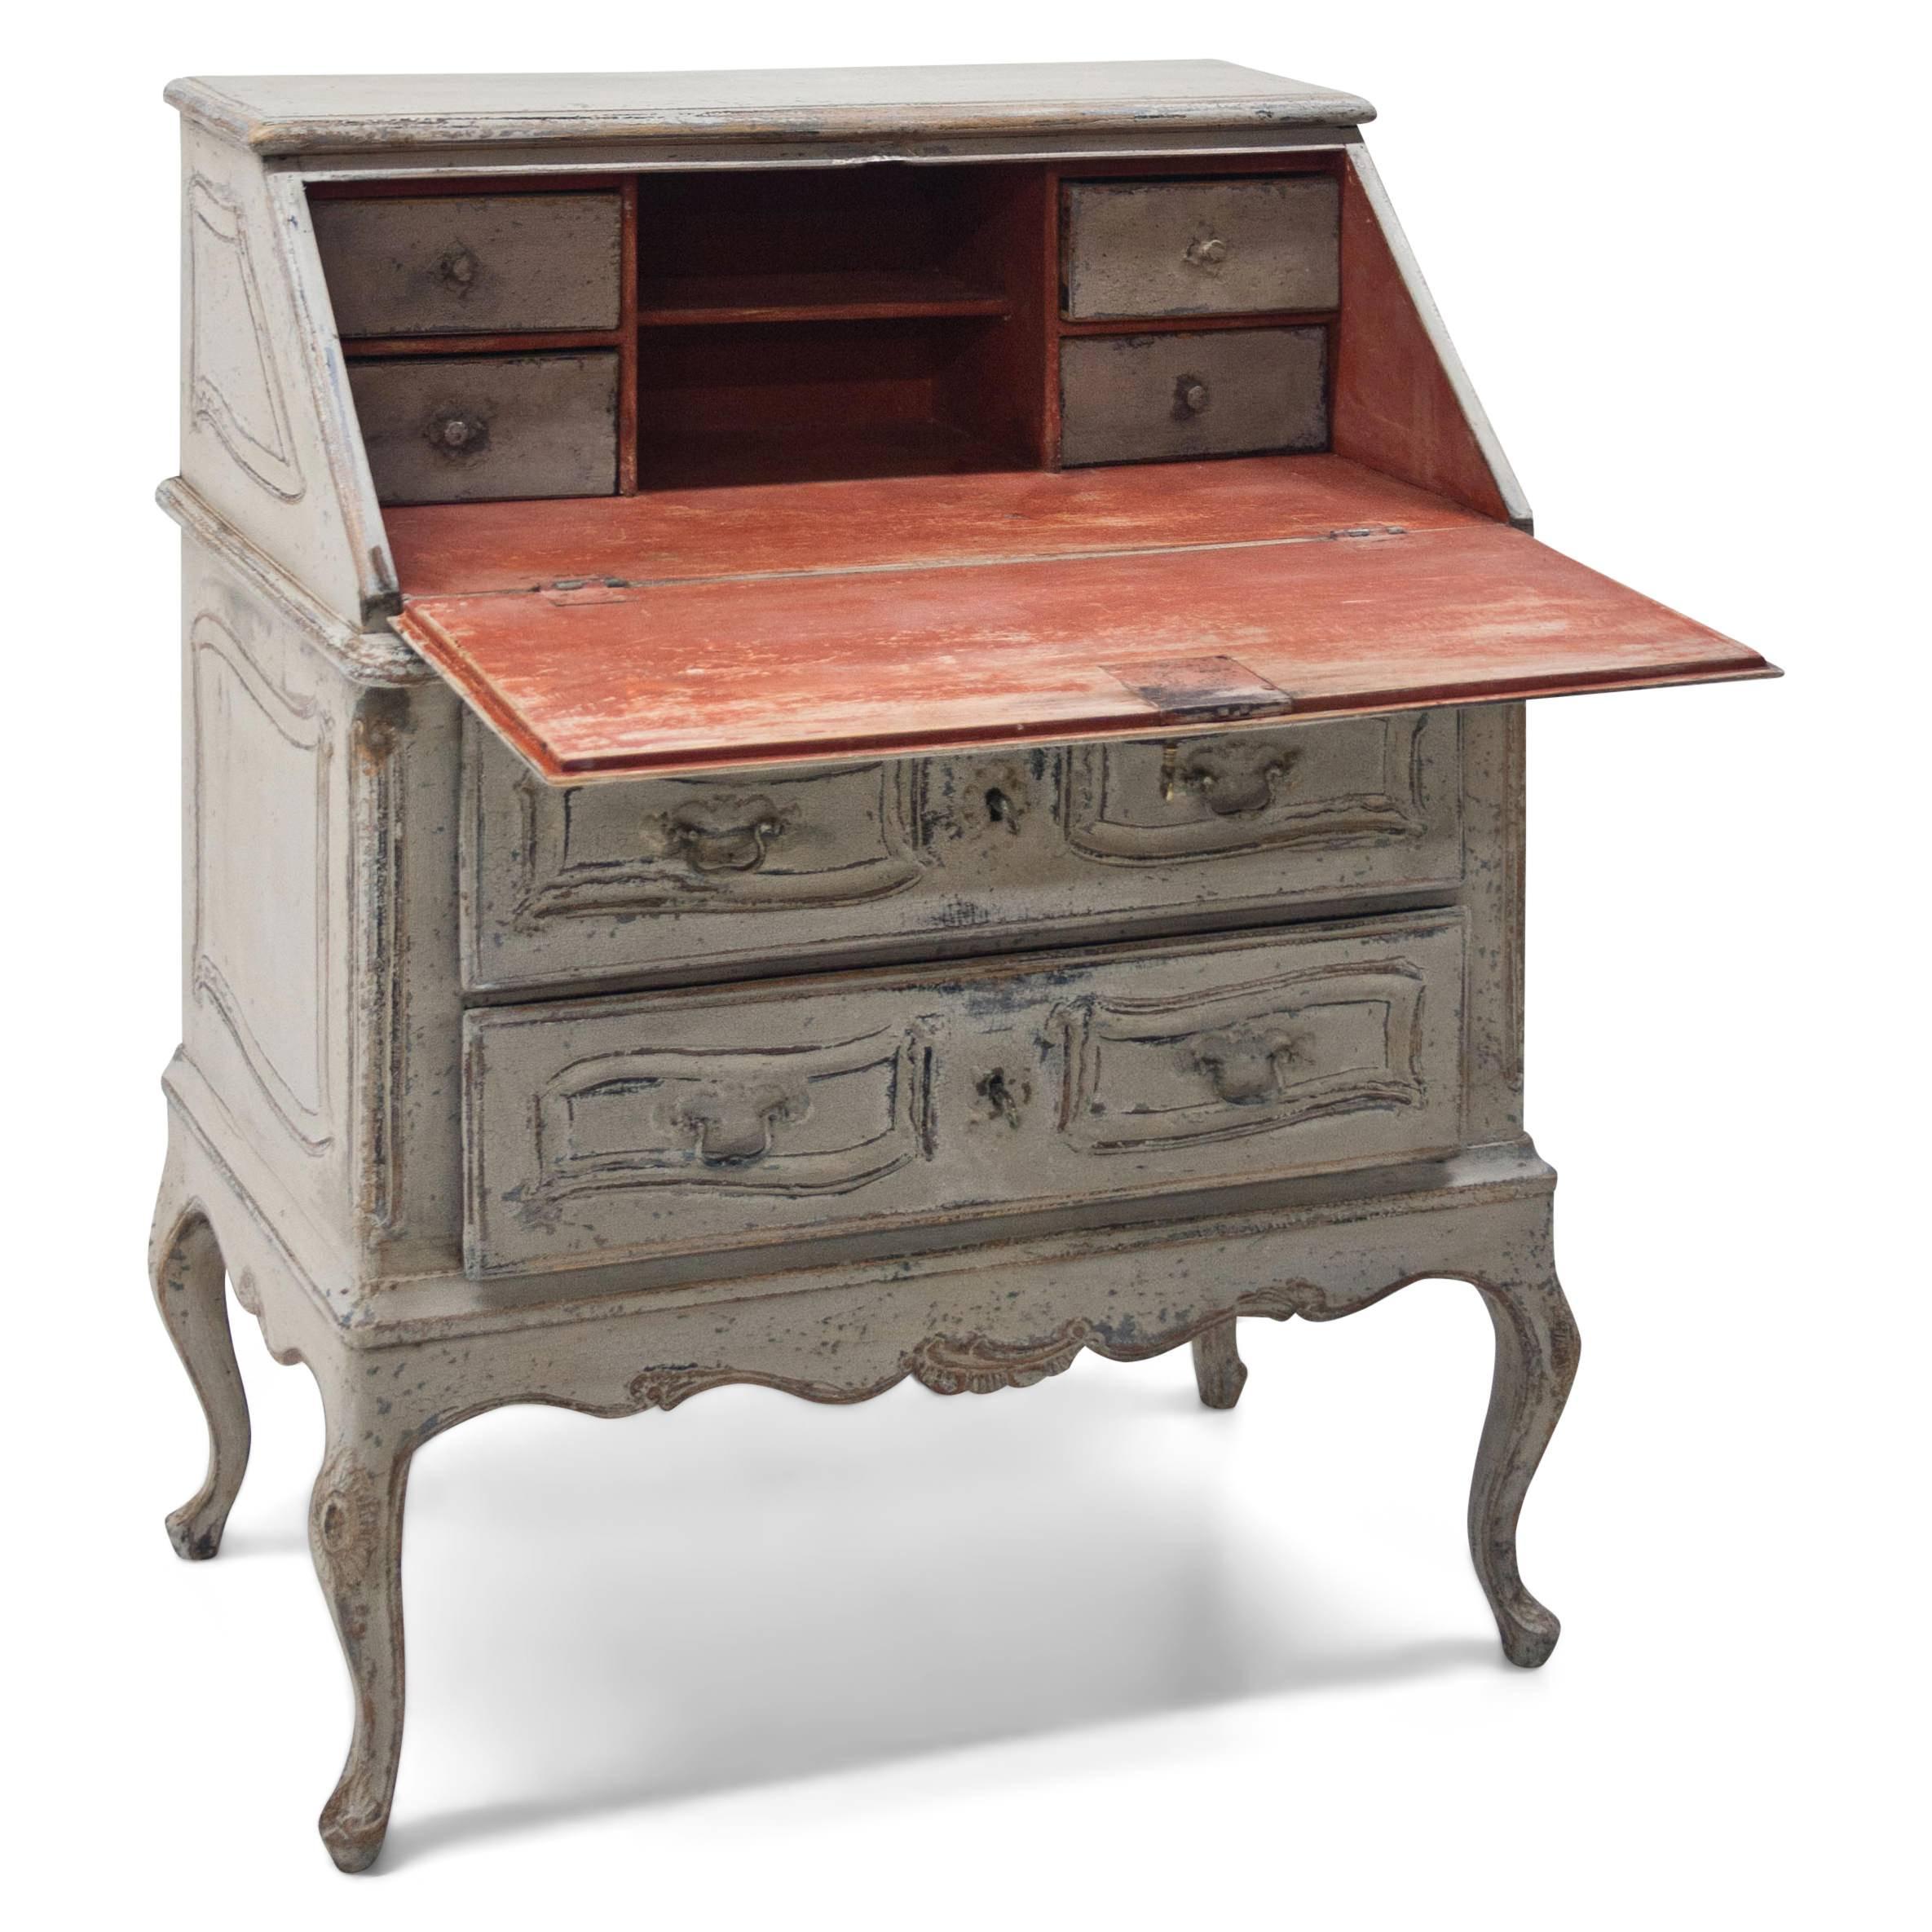 Baroque secretaire on capriole legs with a curvy apron and two drawers. The front and sides show wavy fillings. The writing surface is at a height of 75 cm. The interior is made up of four smaller drawers and one shelf. The grey paint is redone and